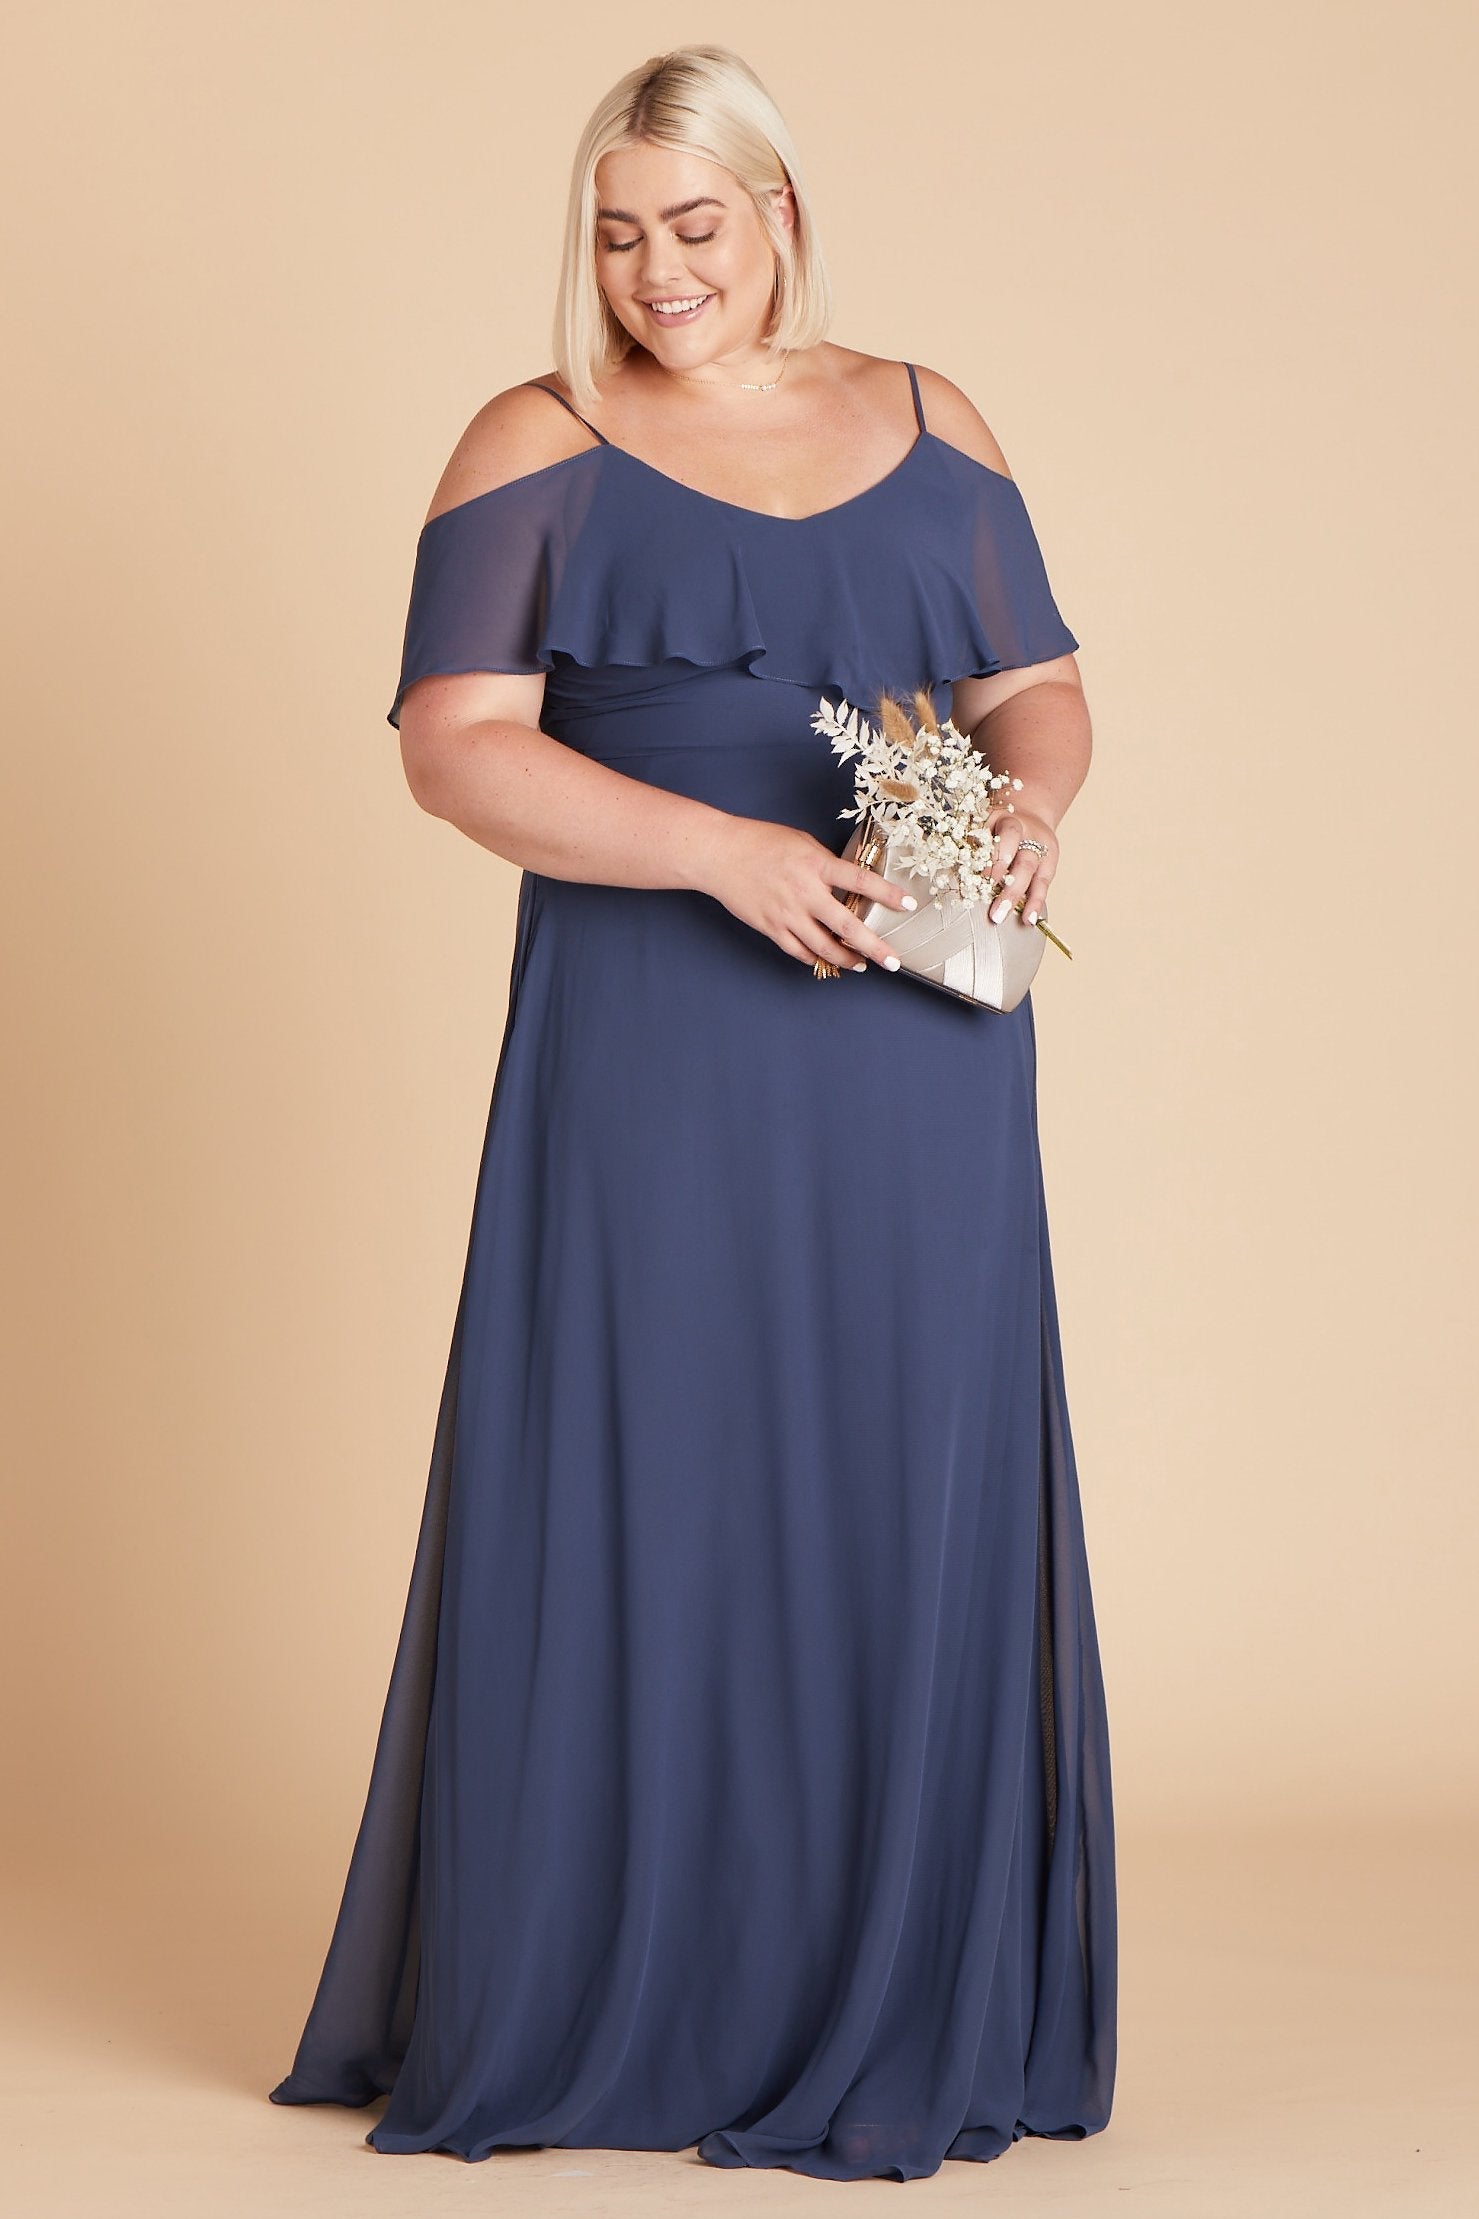 Jane convertible plus size bridesmaid dress in slate blue chiffon by Birdy Grey, front view